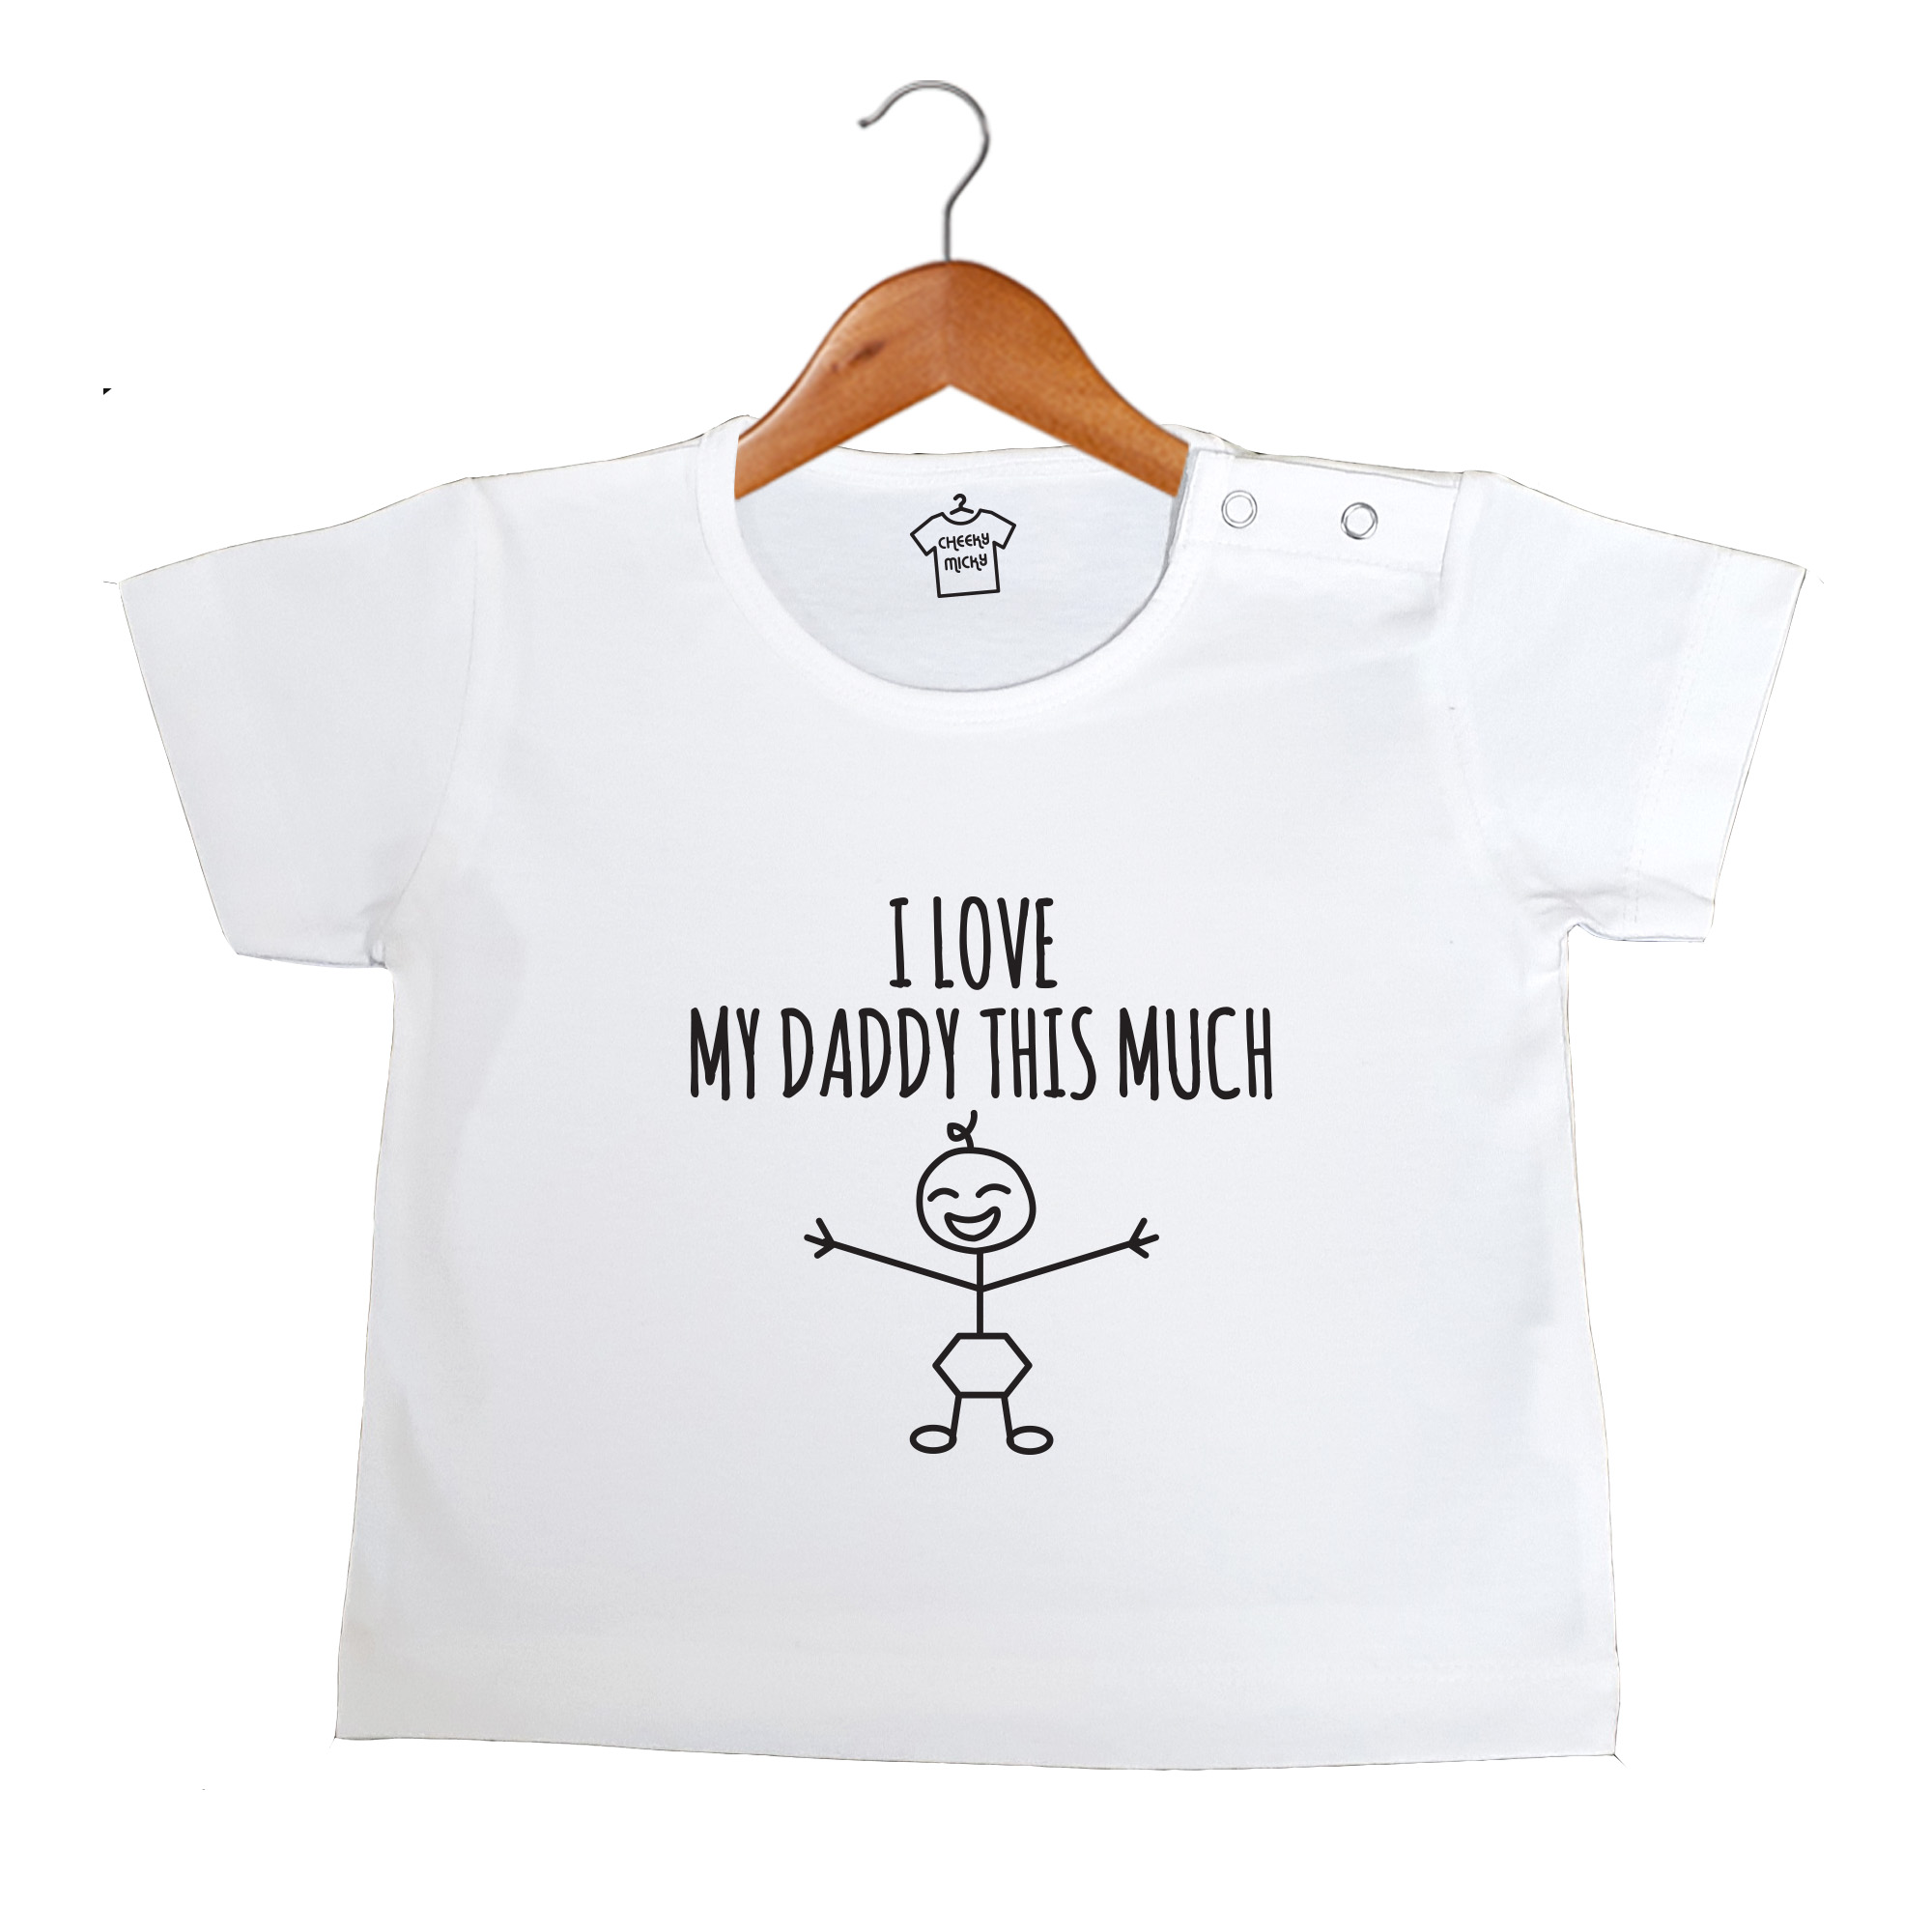 White T-shirt, 100% cotton, machine washable. Age 6-12 months. Print: I Heart My Daddy This Much.